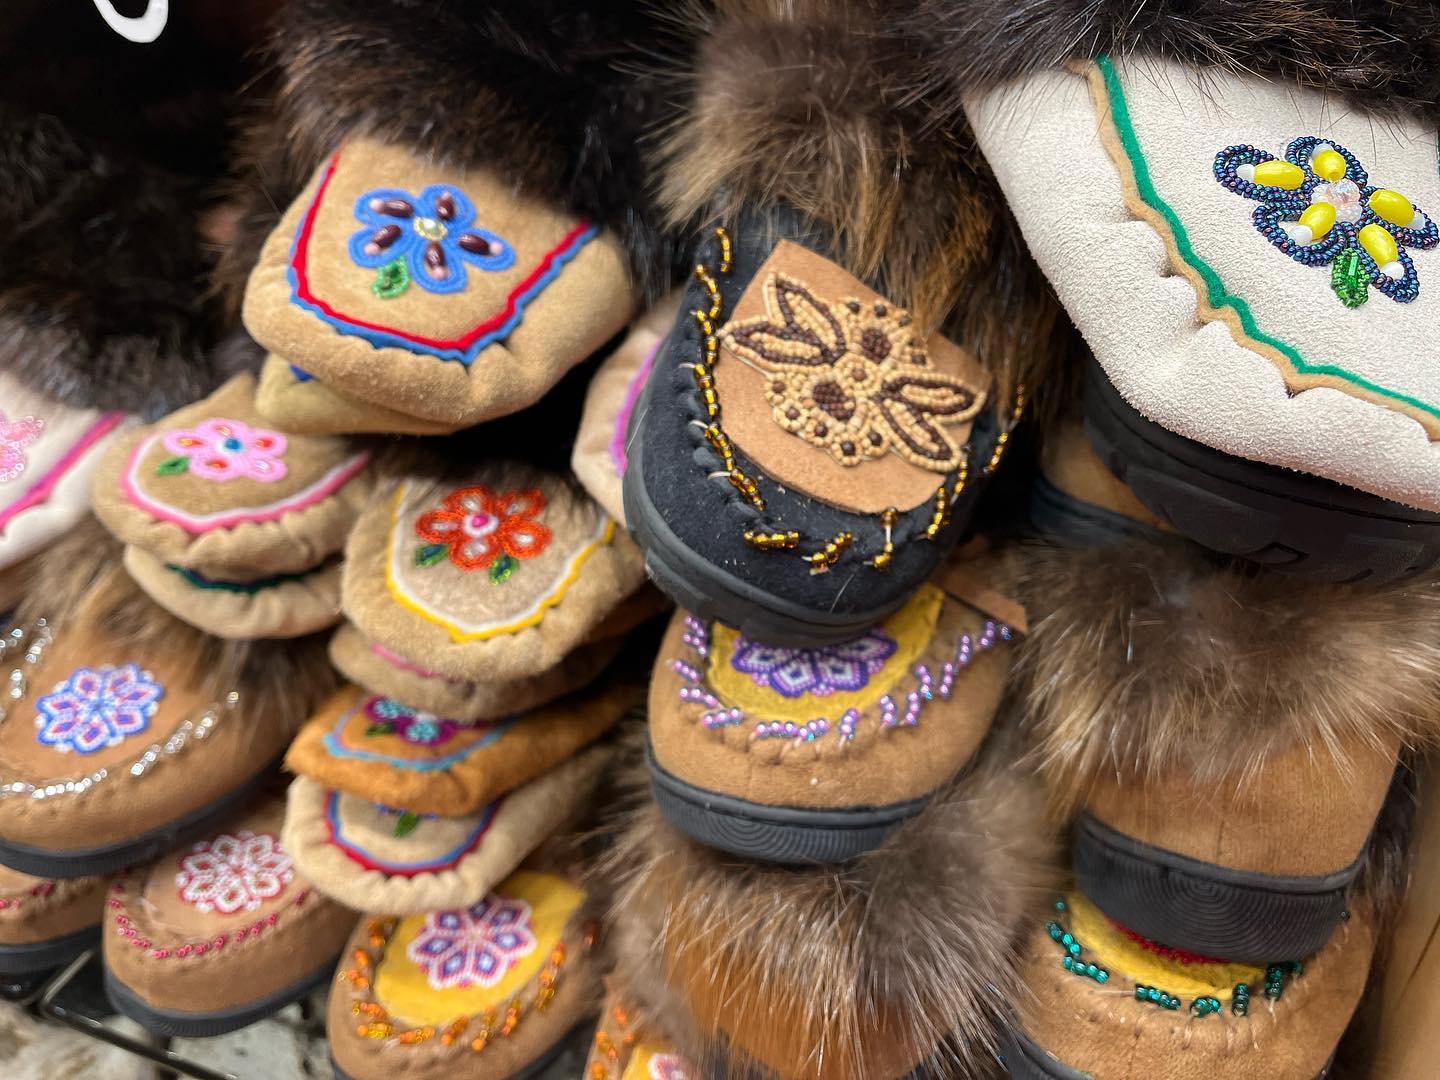 Moccasins from Tripp's Mt. Juneau Trading Post